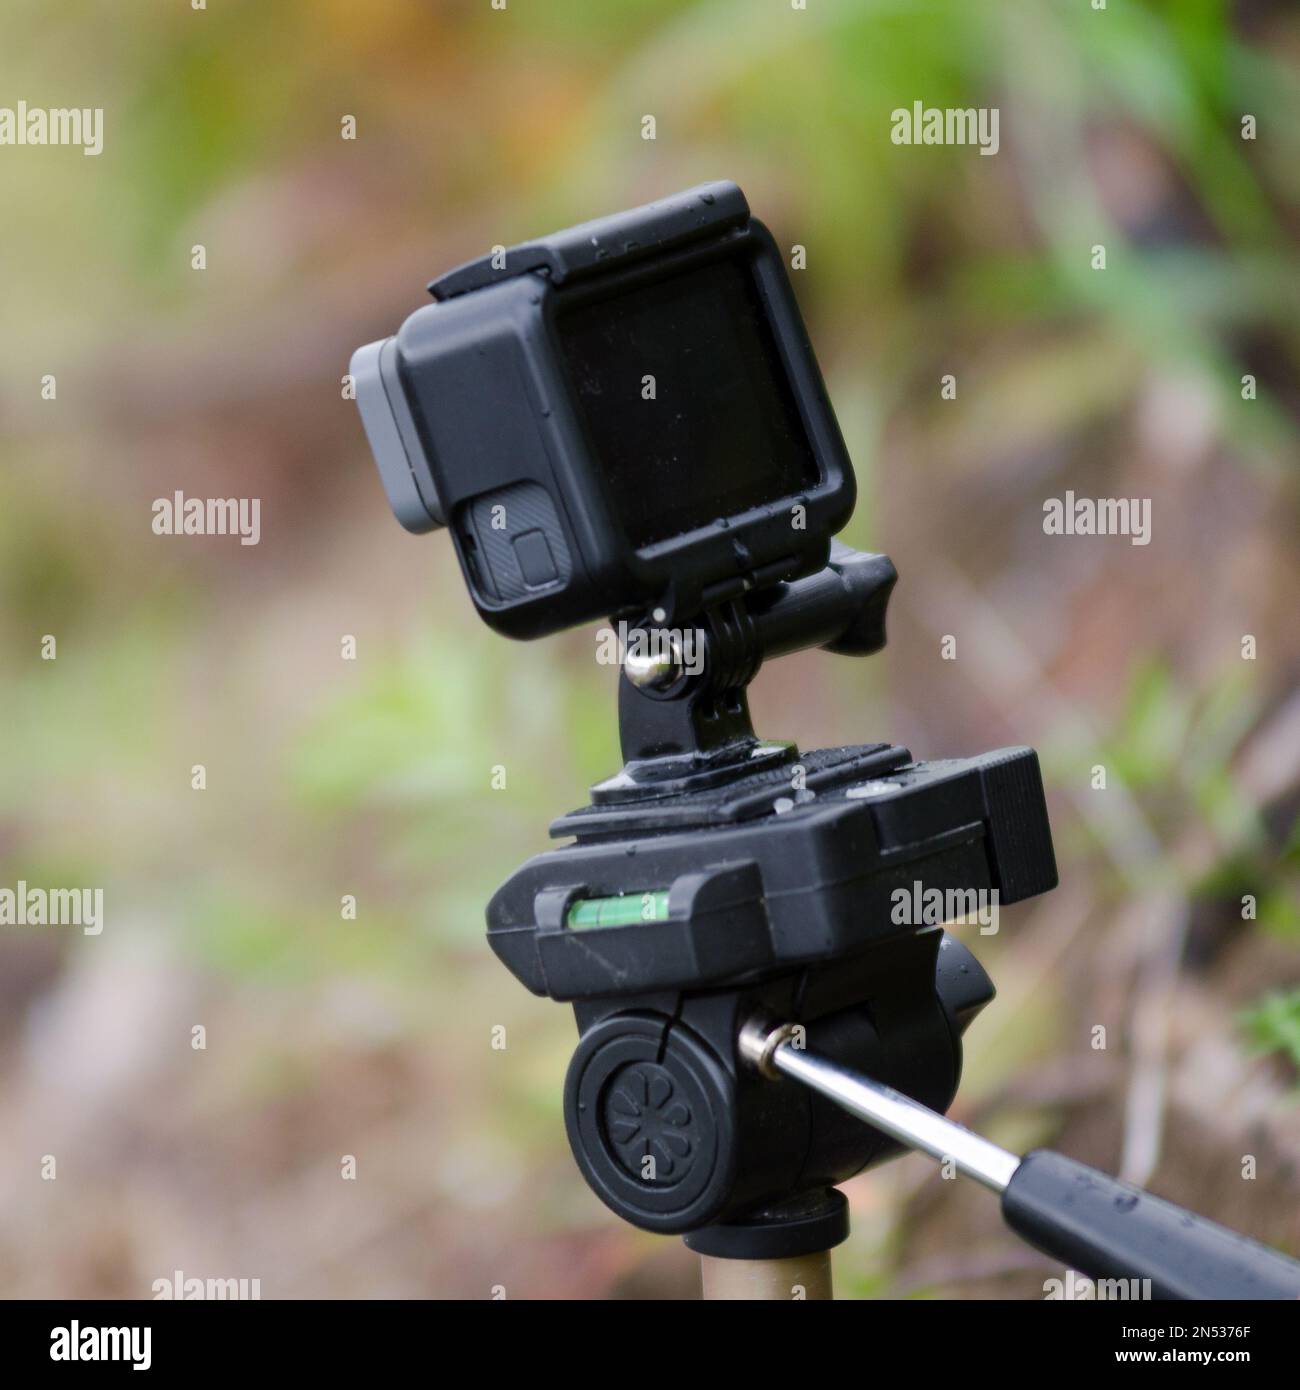 Action camera stands on a small tripod with a water level, recording video, among the grass and forest. Stock Photo